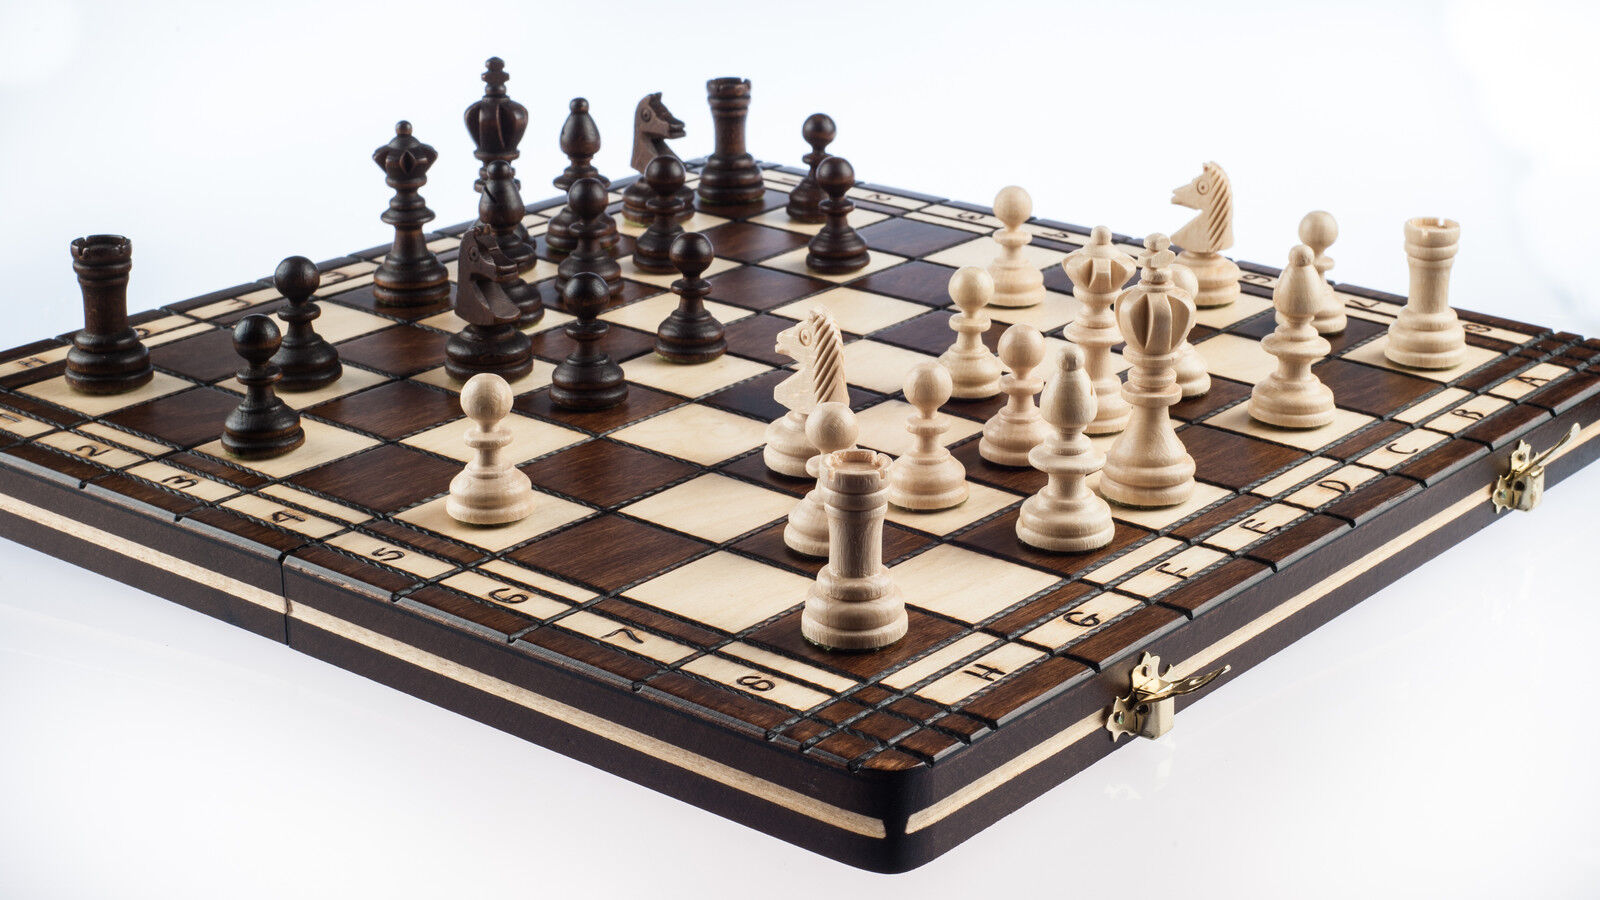 Brand New♞ Hand Crafted Wooden Chess And Draughts Set3 36cm x 36cm ♚